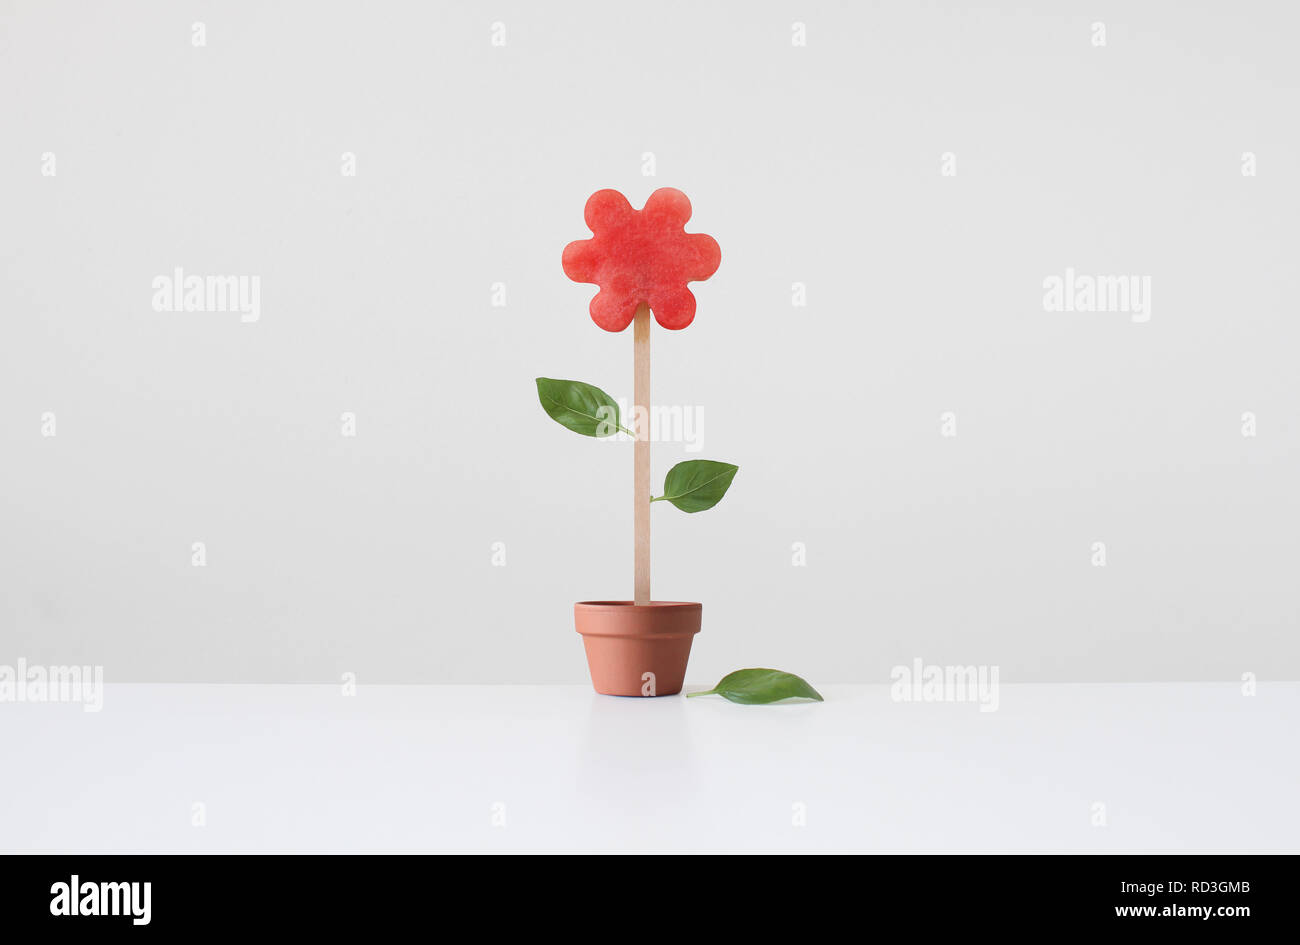 Conceptual flower losing a leaf growing in a pot plant Stock Photo